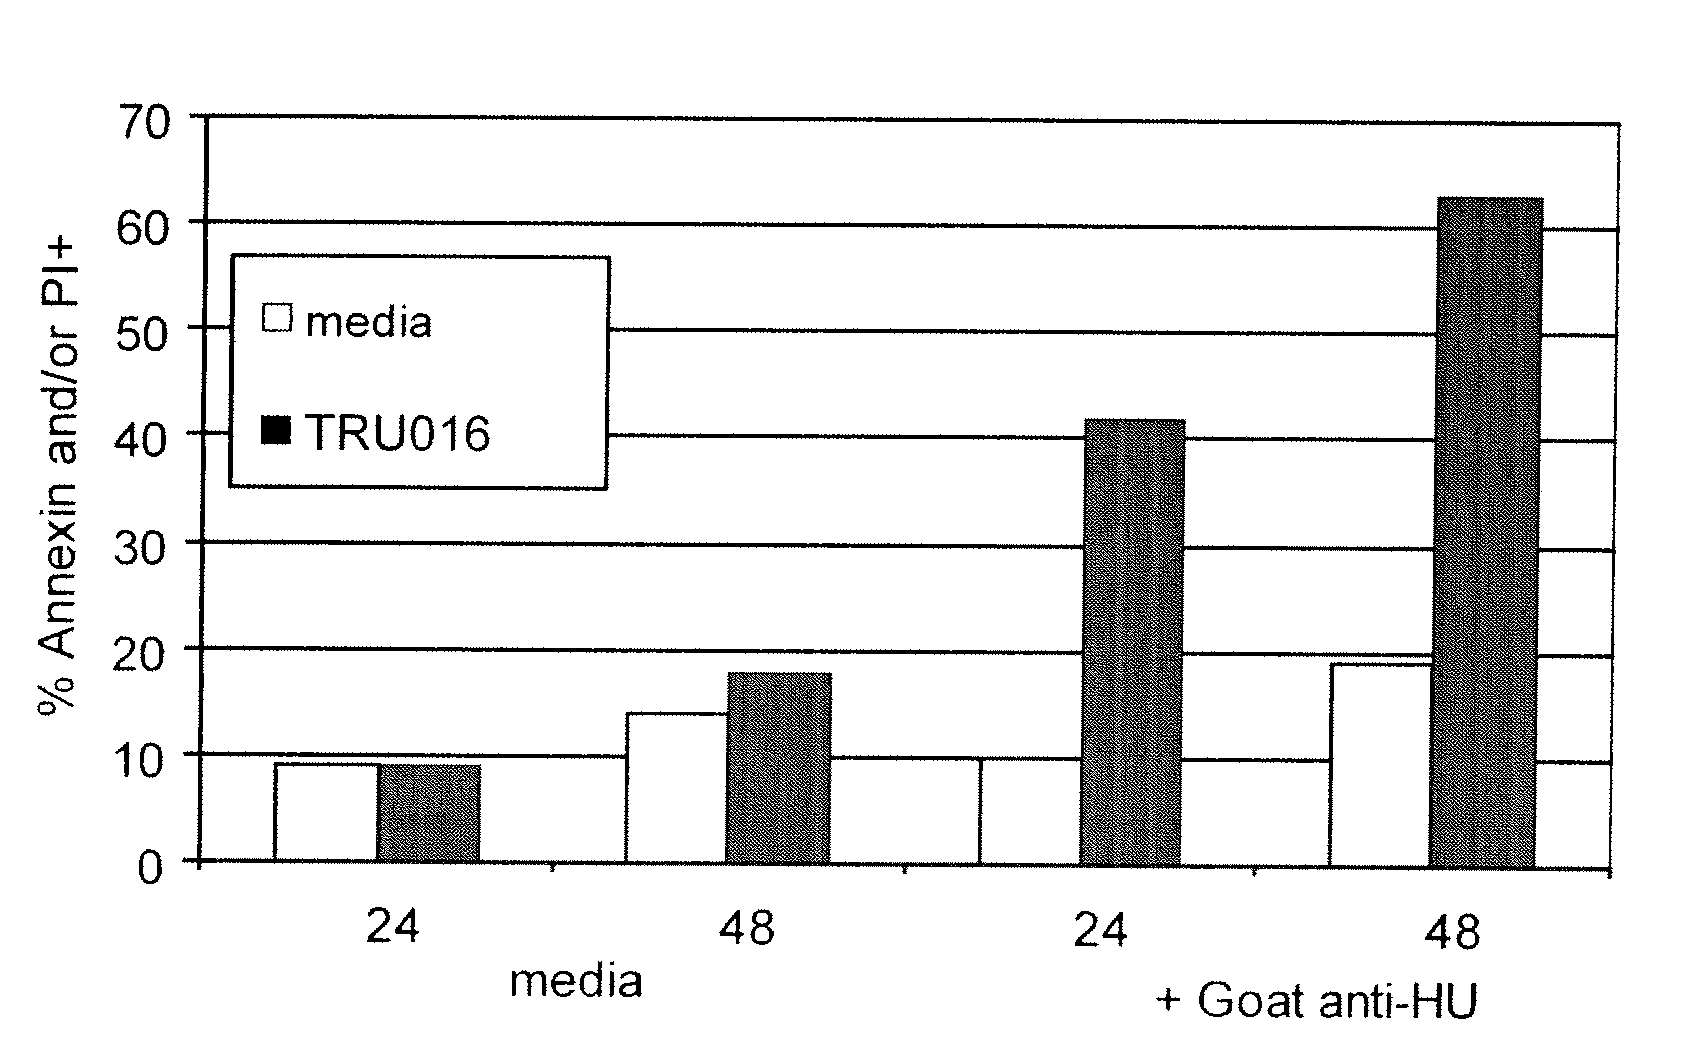 B-Cell Reduction Using CD37-Specific and CD20-Specific Binding Molecules